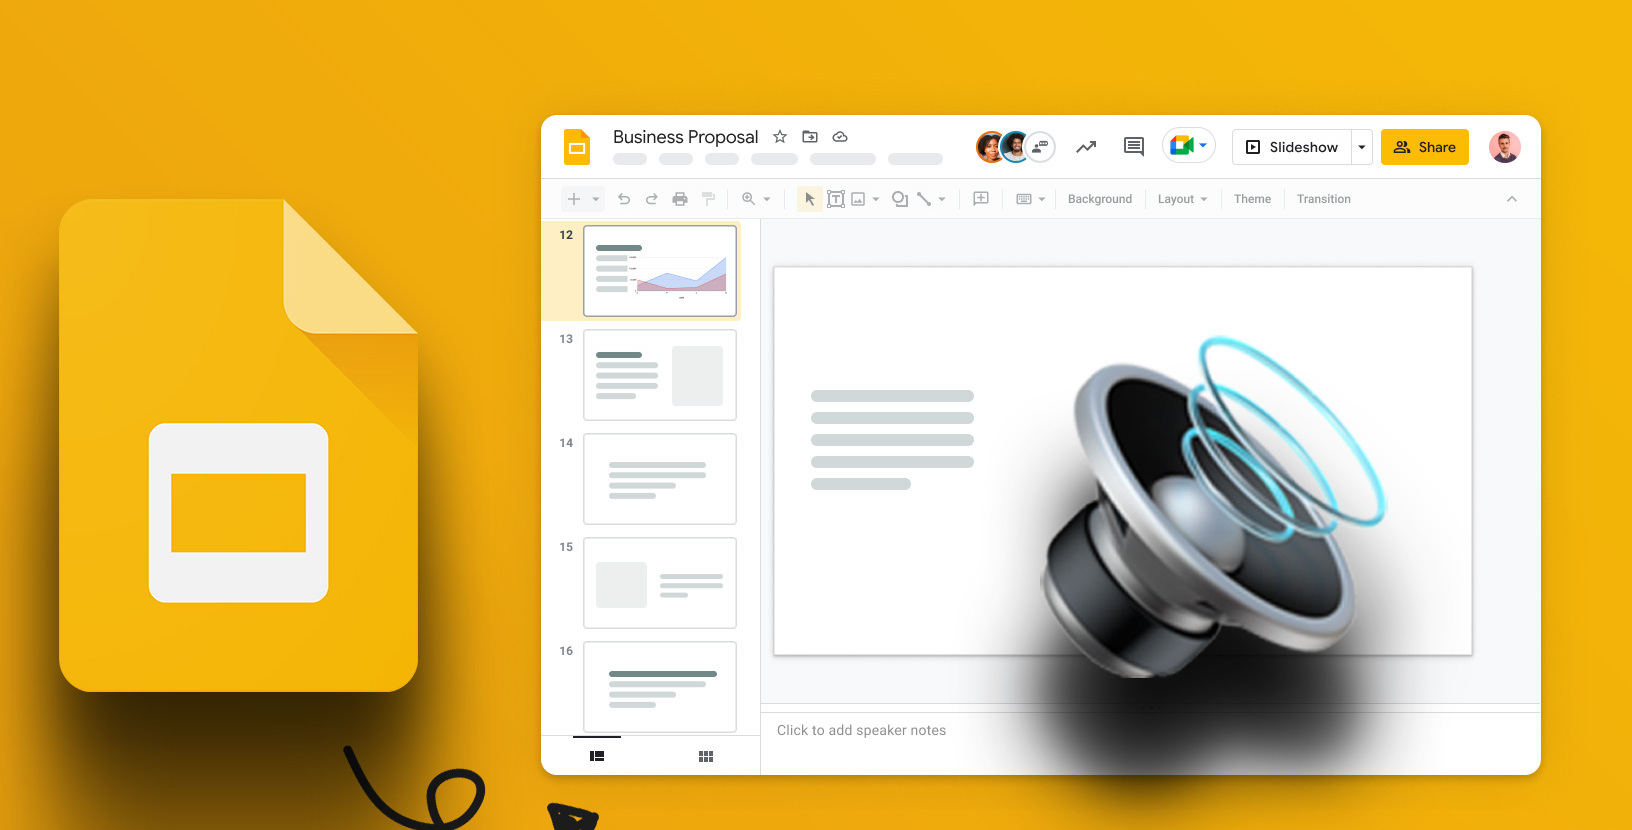 How To Add MP3 To Google Slides